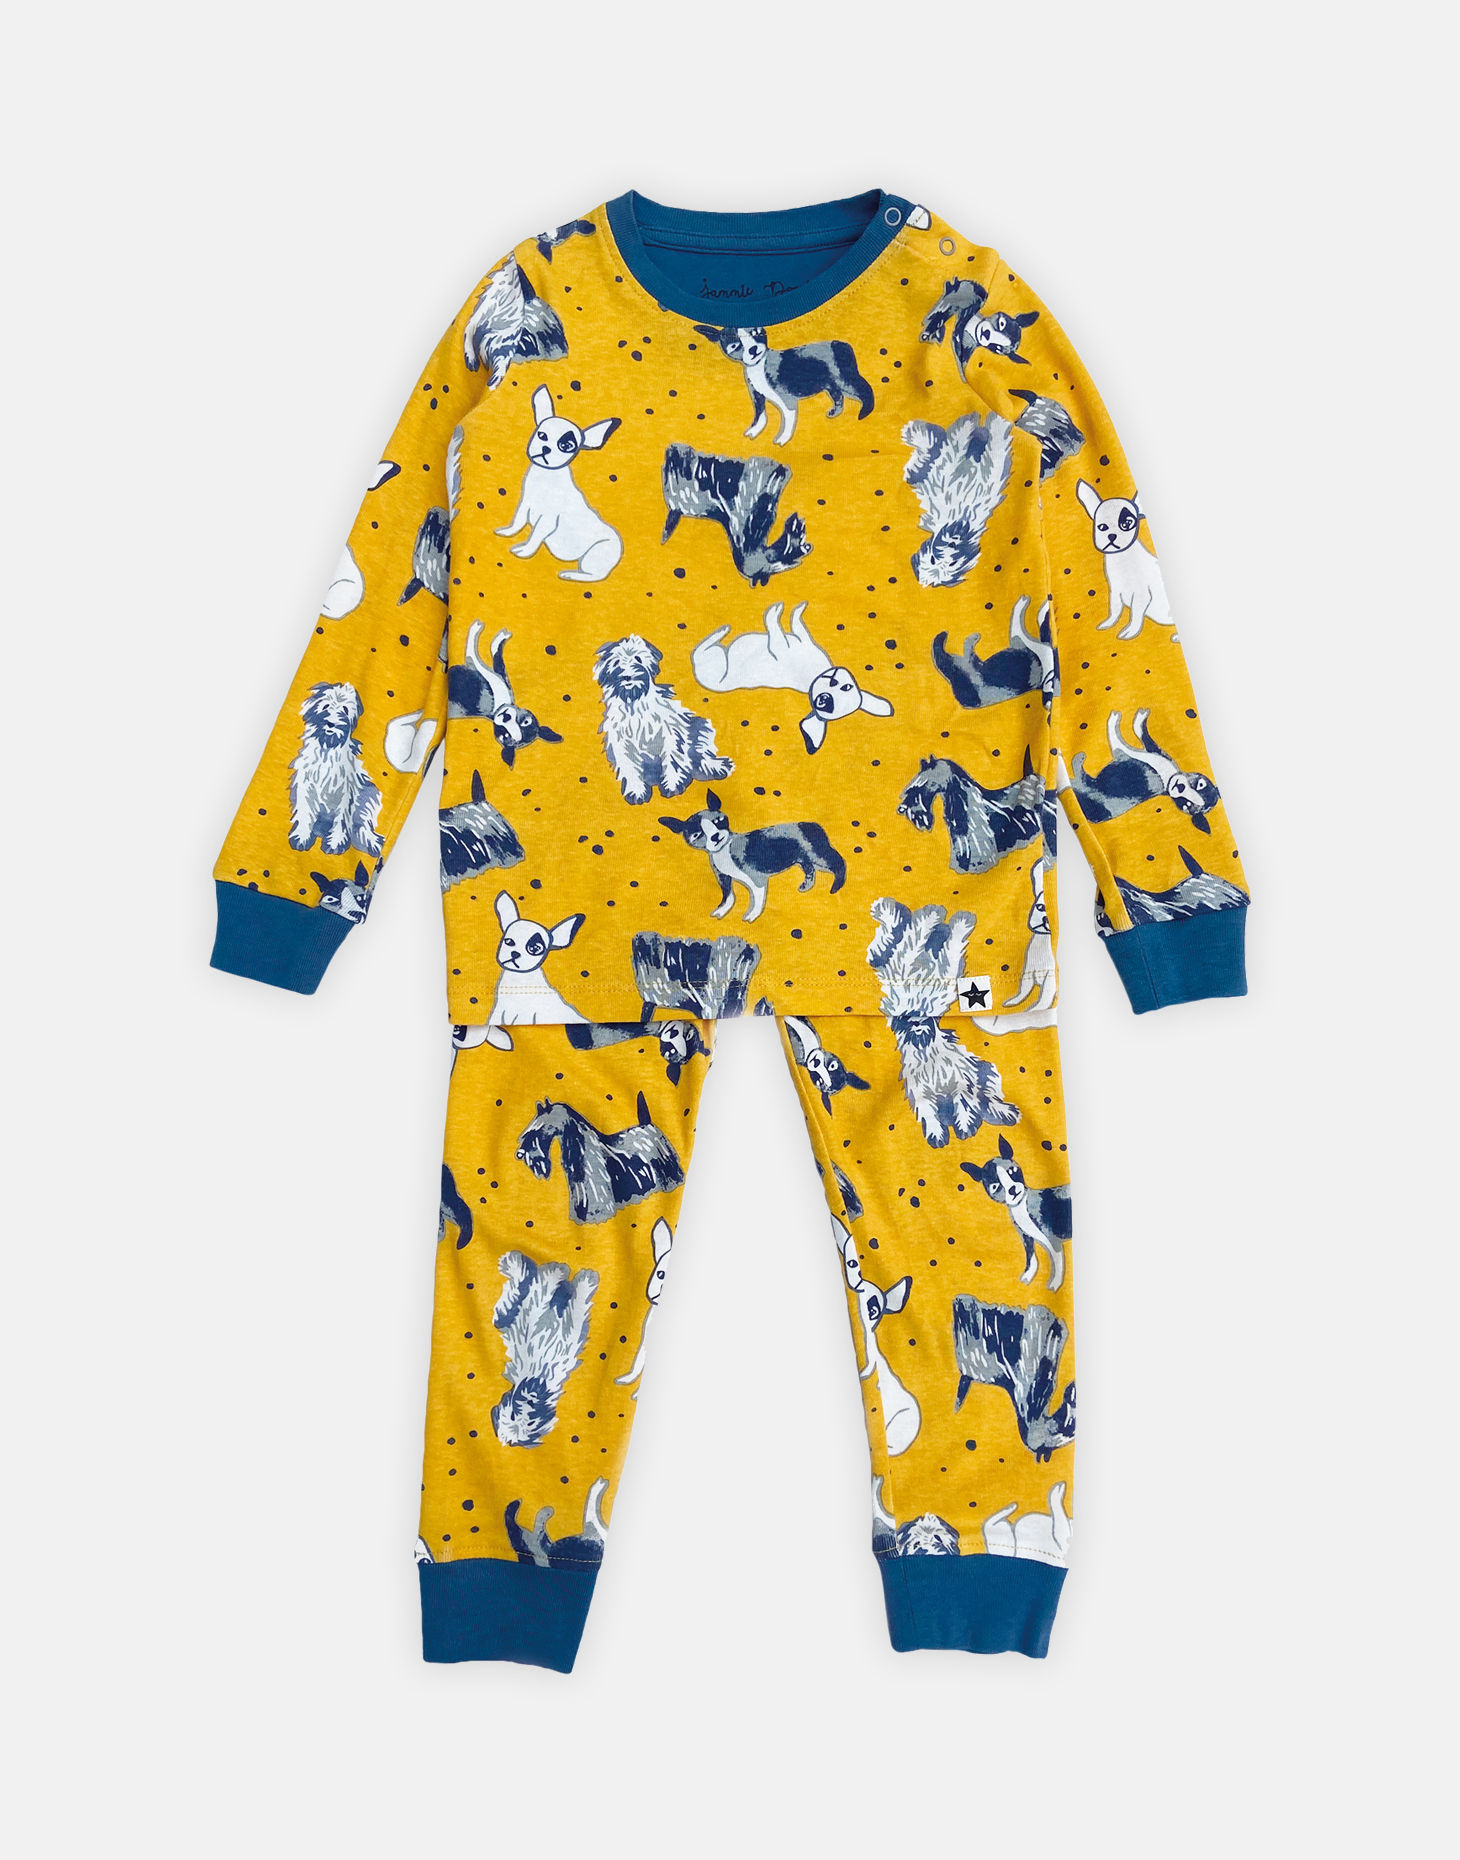 Jammie Doodles Yellow Dog PJ's size 0-6 months